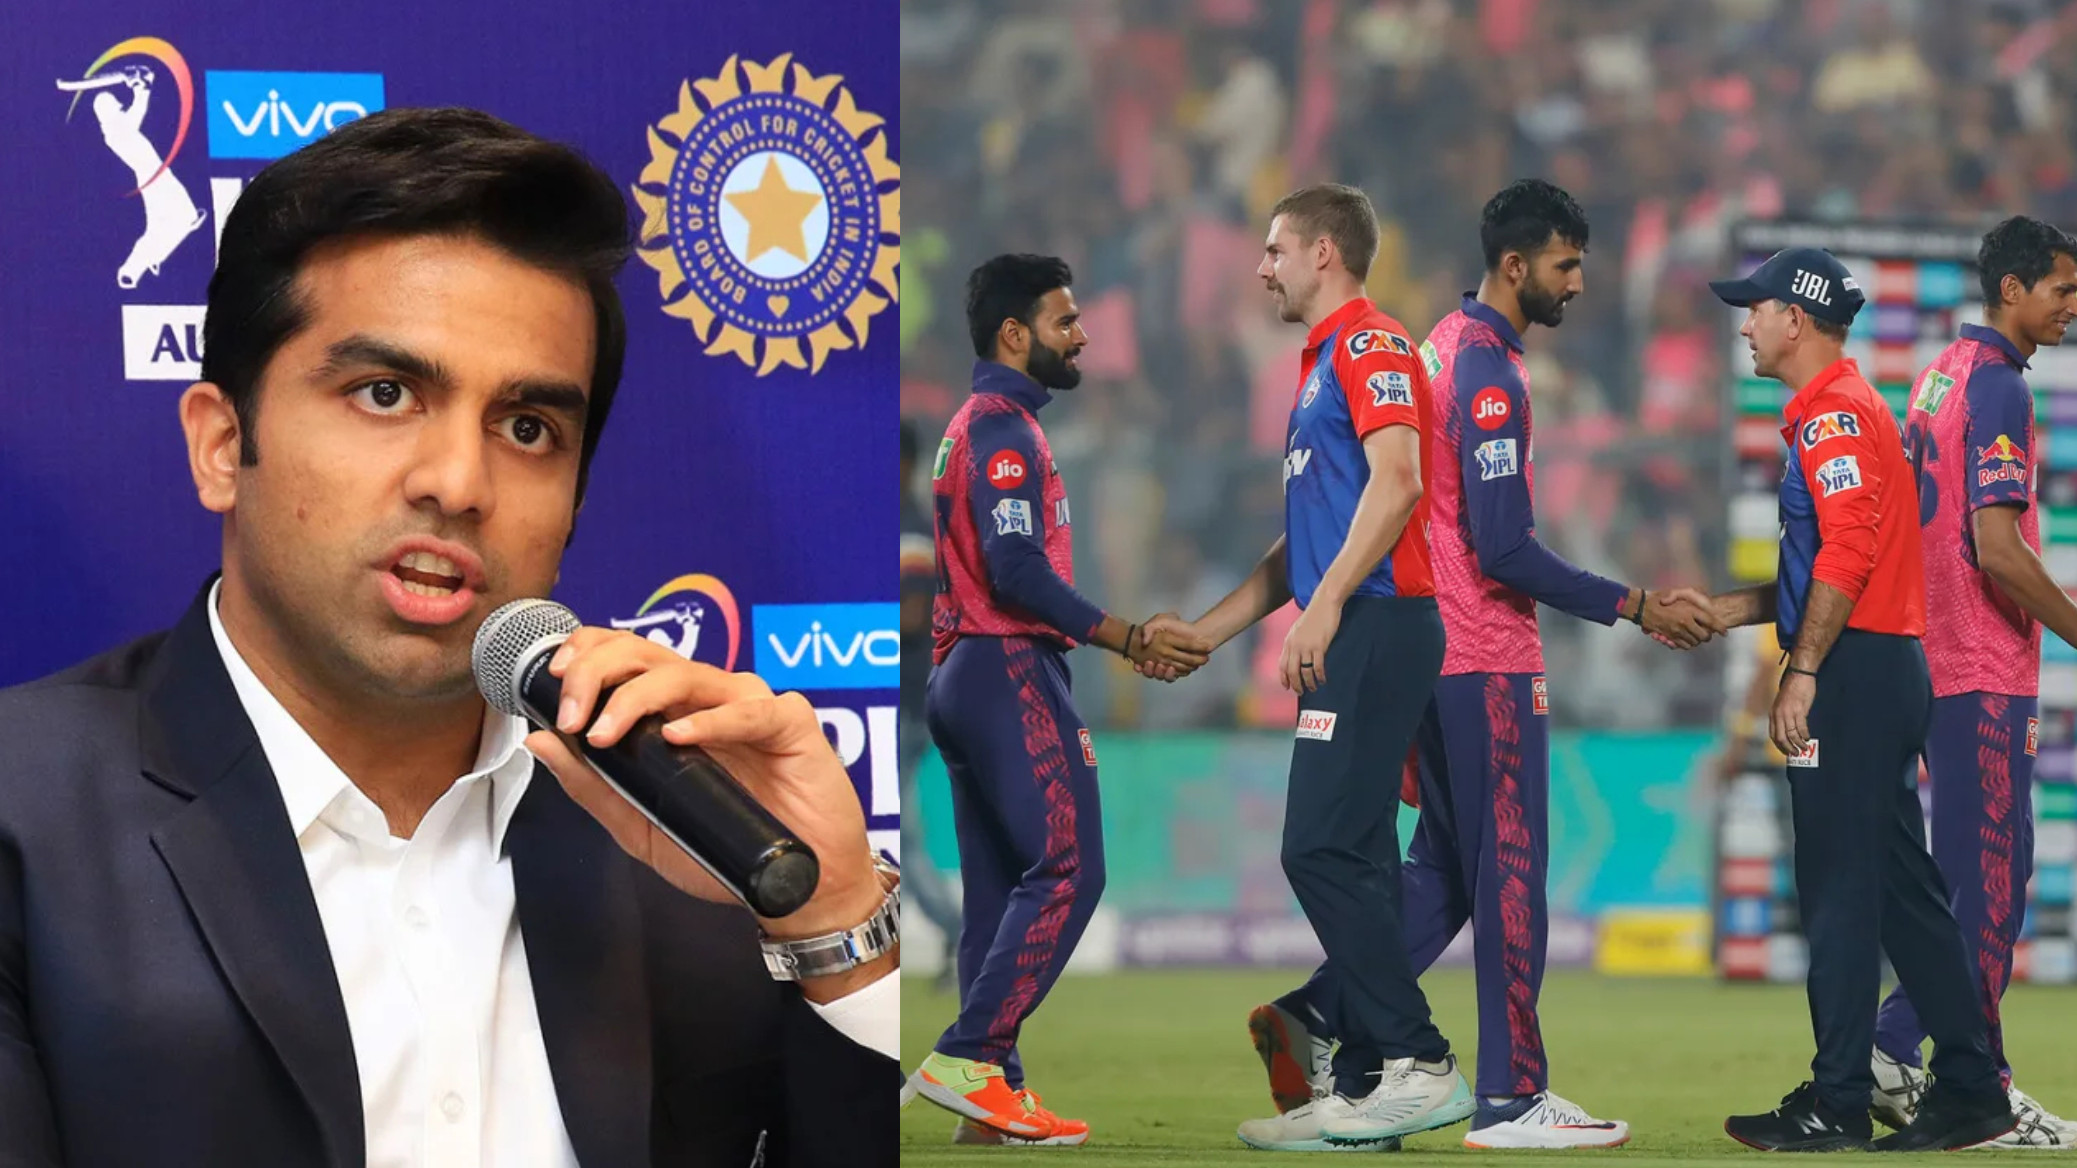 IPL 2023: “3 games, 3 losses - very tough to see this”- DC co-owner Parth Jindal tweets after loss to RR